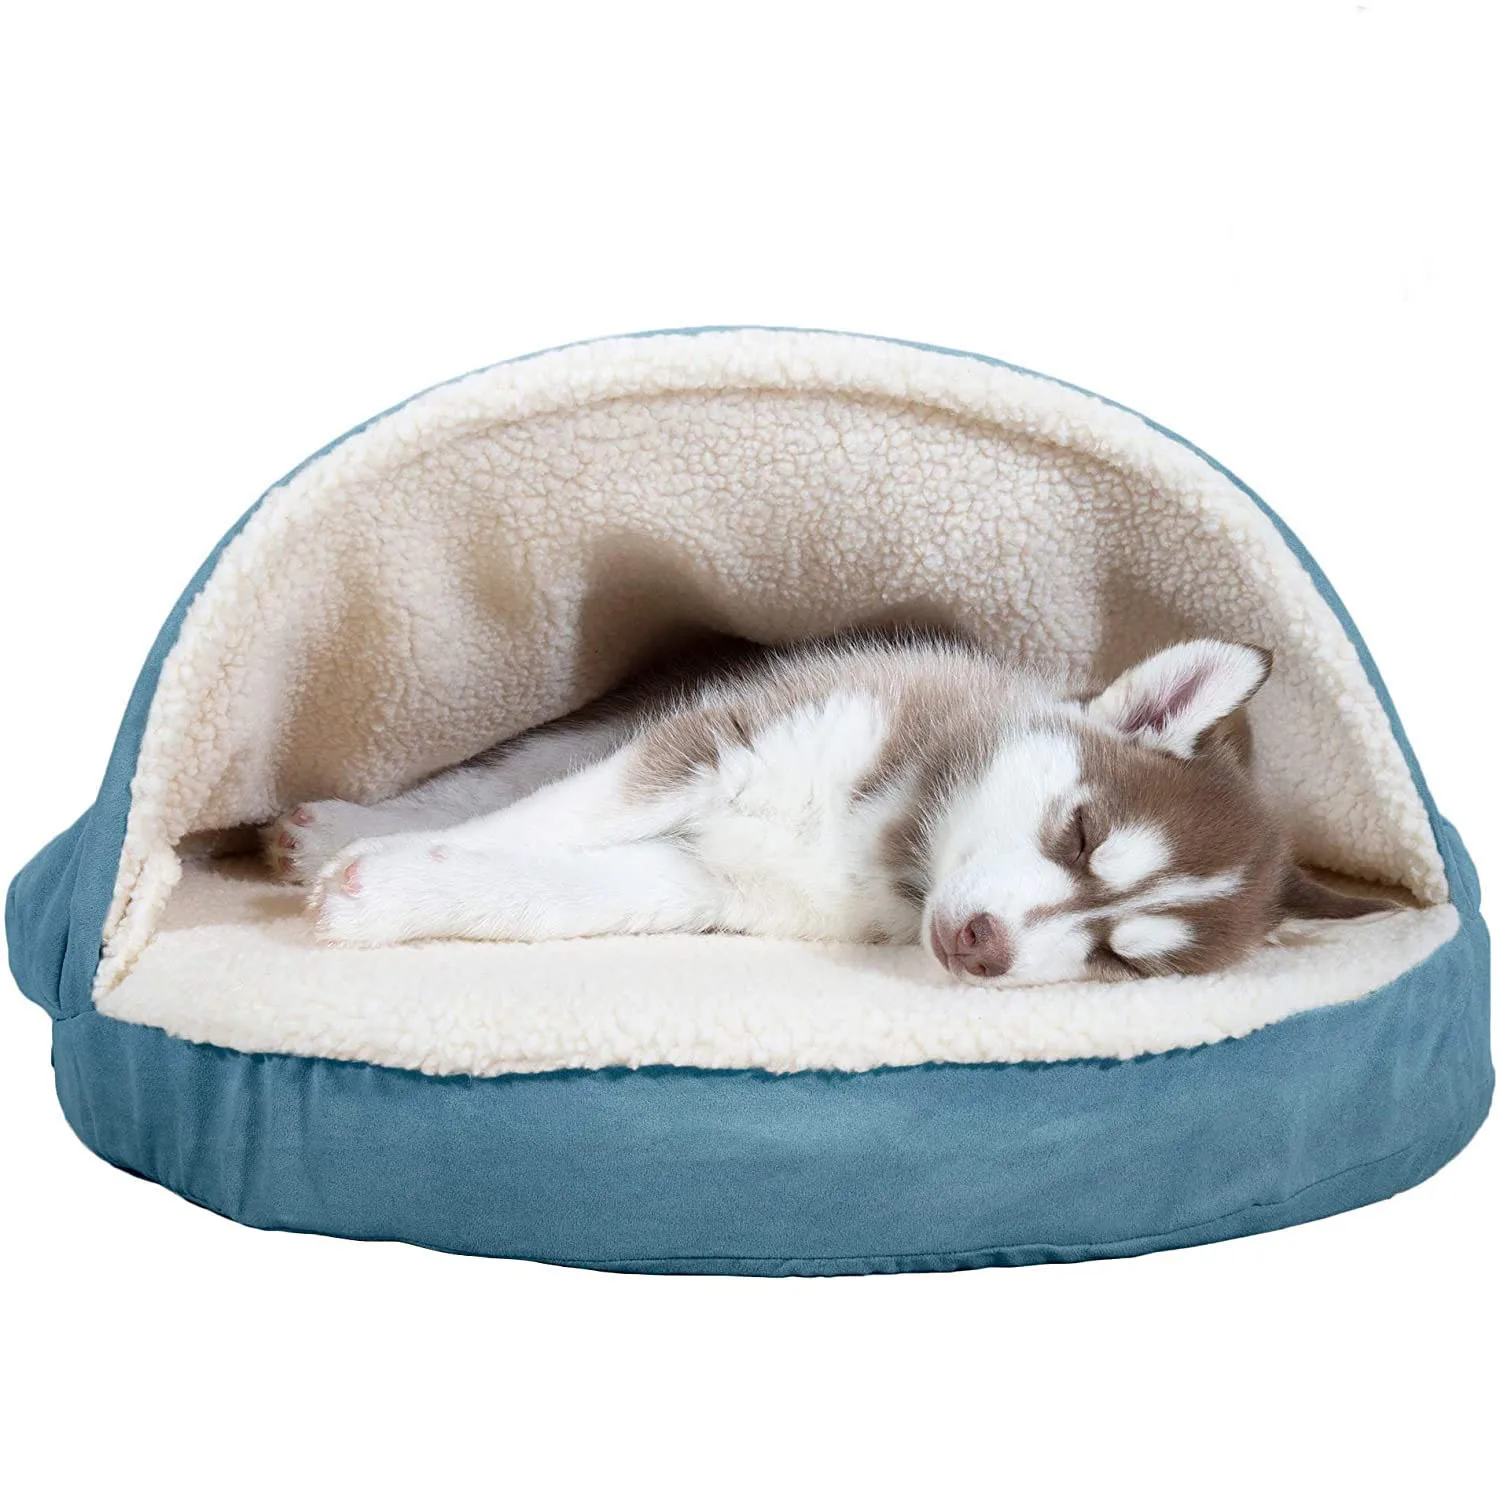 Round Orthopedic Snuggery Blanket Burrowing Cave Convertible Hood Dog Bed For Dogs - Buy Dog Bed,Round Dog Bed,Foldable Convertible Product on Alibaba.com - Winter Products for Dogs and Cats